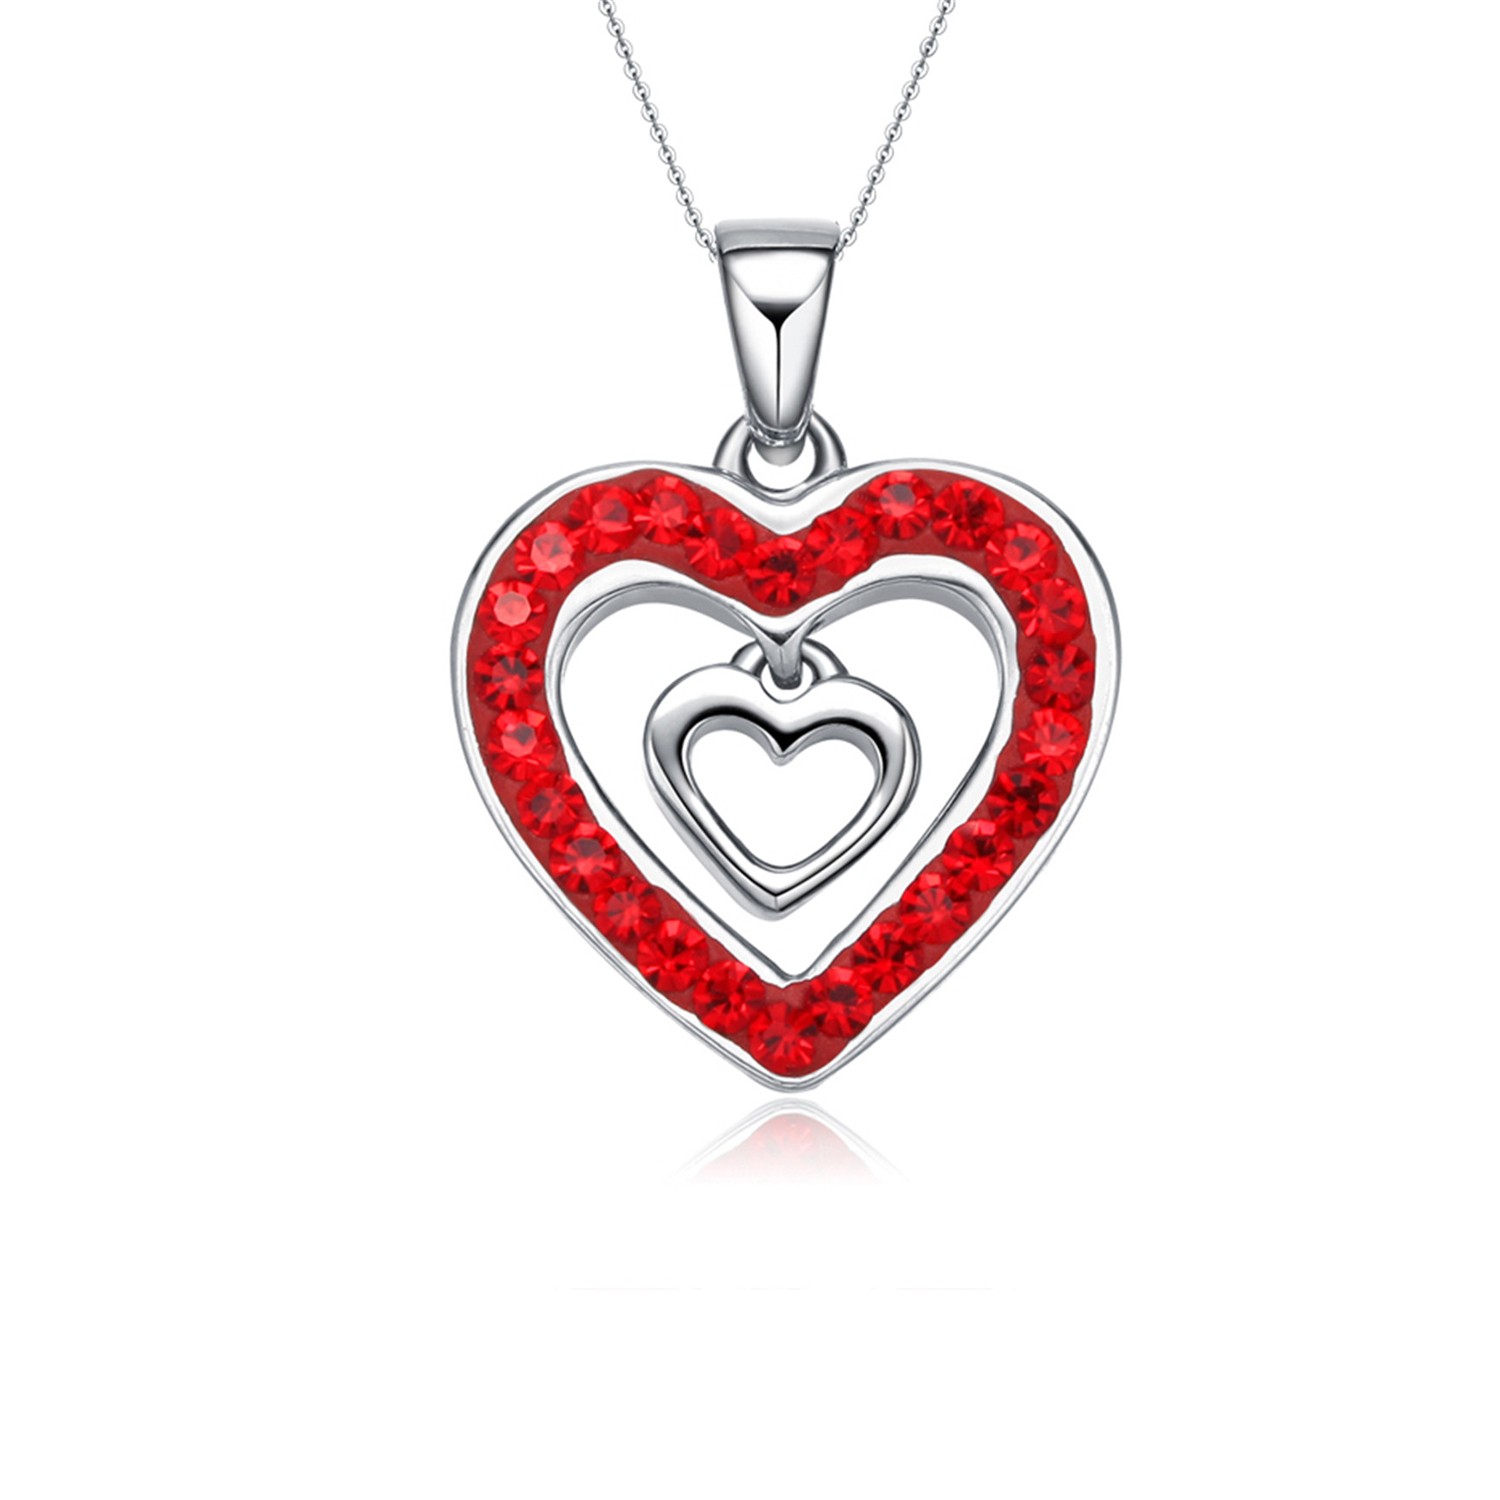 Women Jewelry Red Cubic Zirconia Love Heart Pendant Necklace 925 Sterling Silver